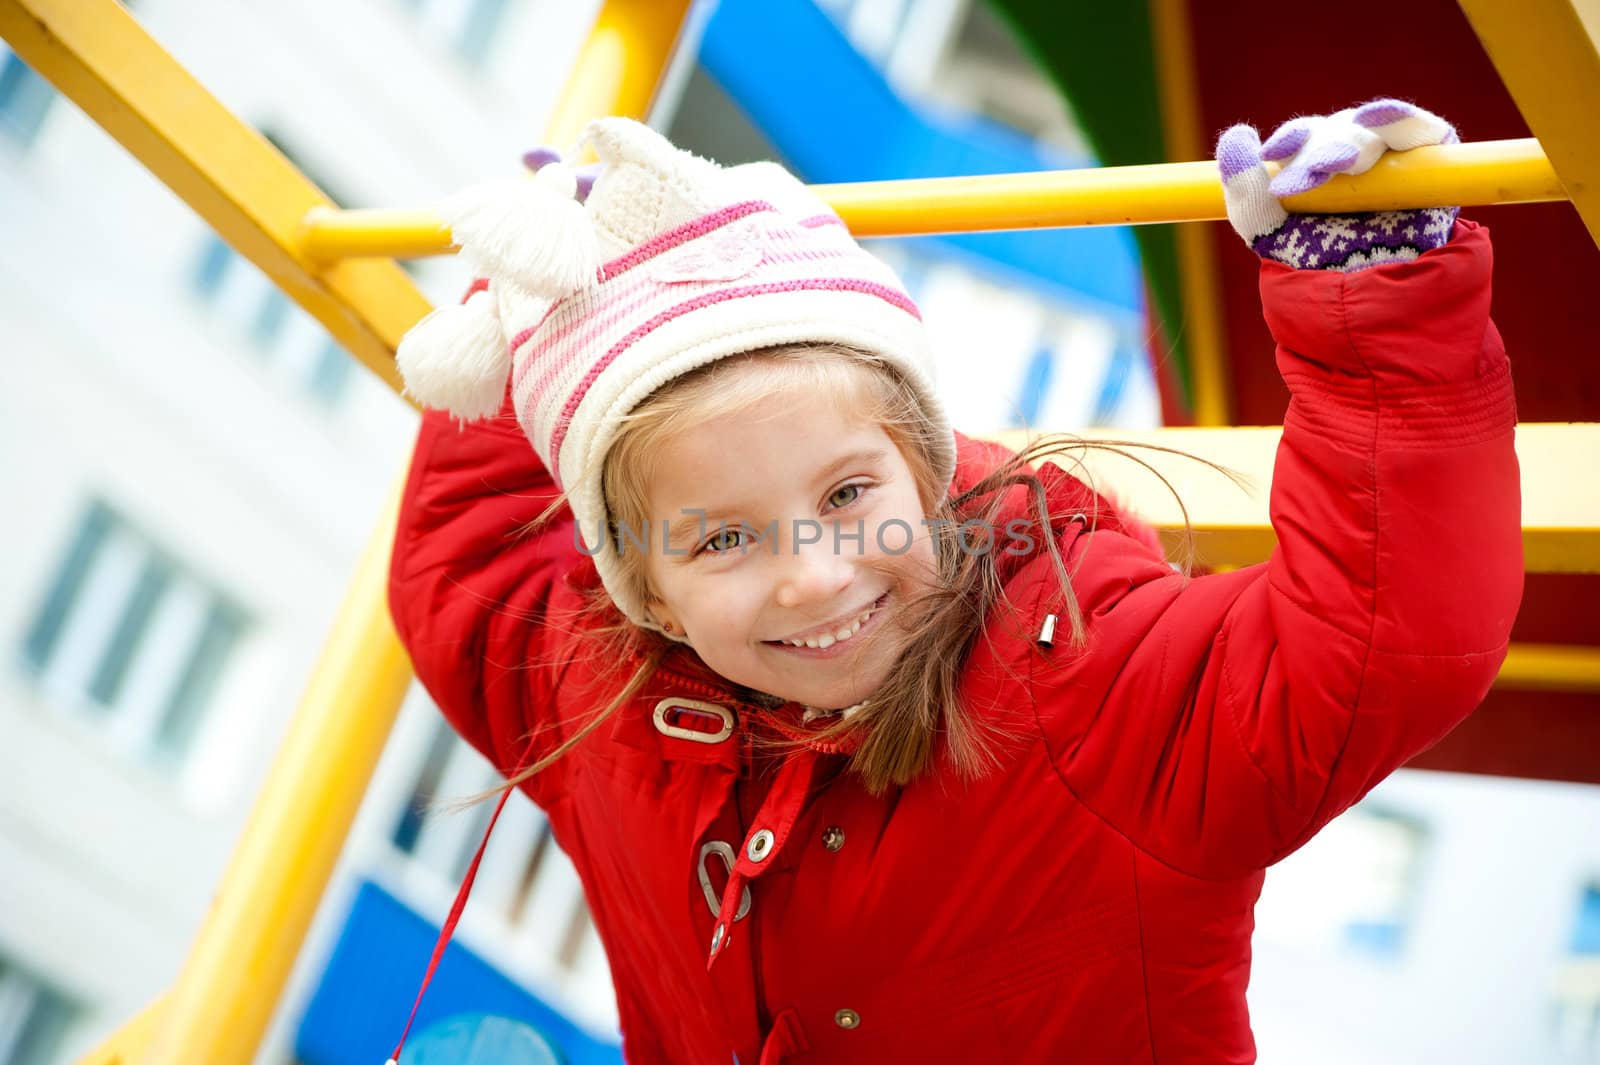 Cute little girl in red on outdoor playground equipment